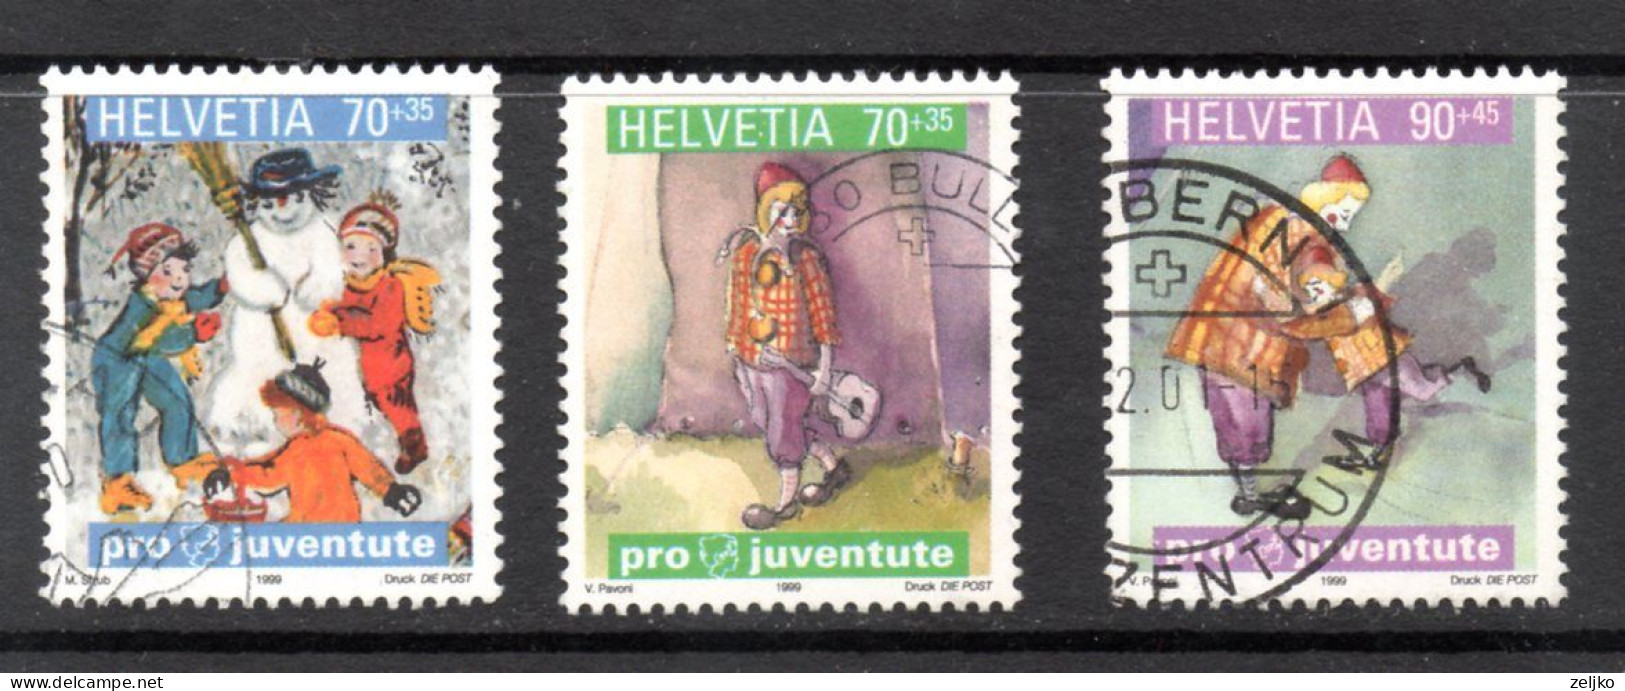 Switzerland, Used, 1999, Michel 1701, 1702, 1703, Pro Juventute - Used Stamps